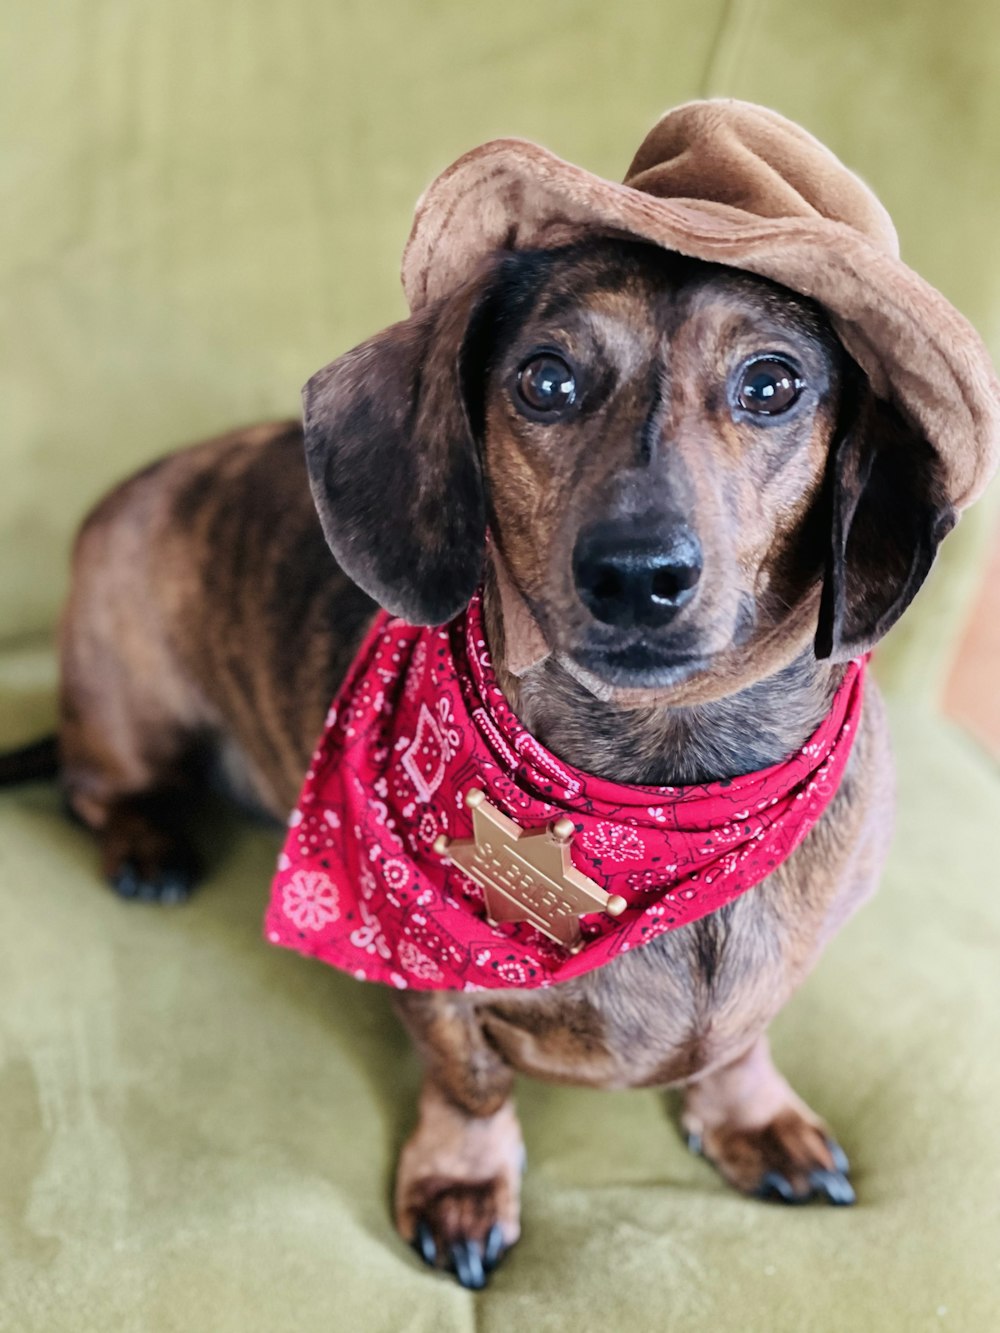 brown and black dachshund wearing red and white polka dot shirt